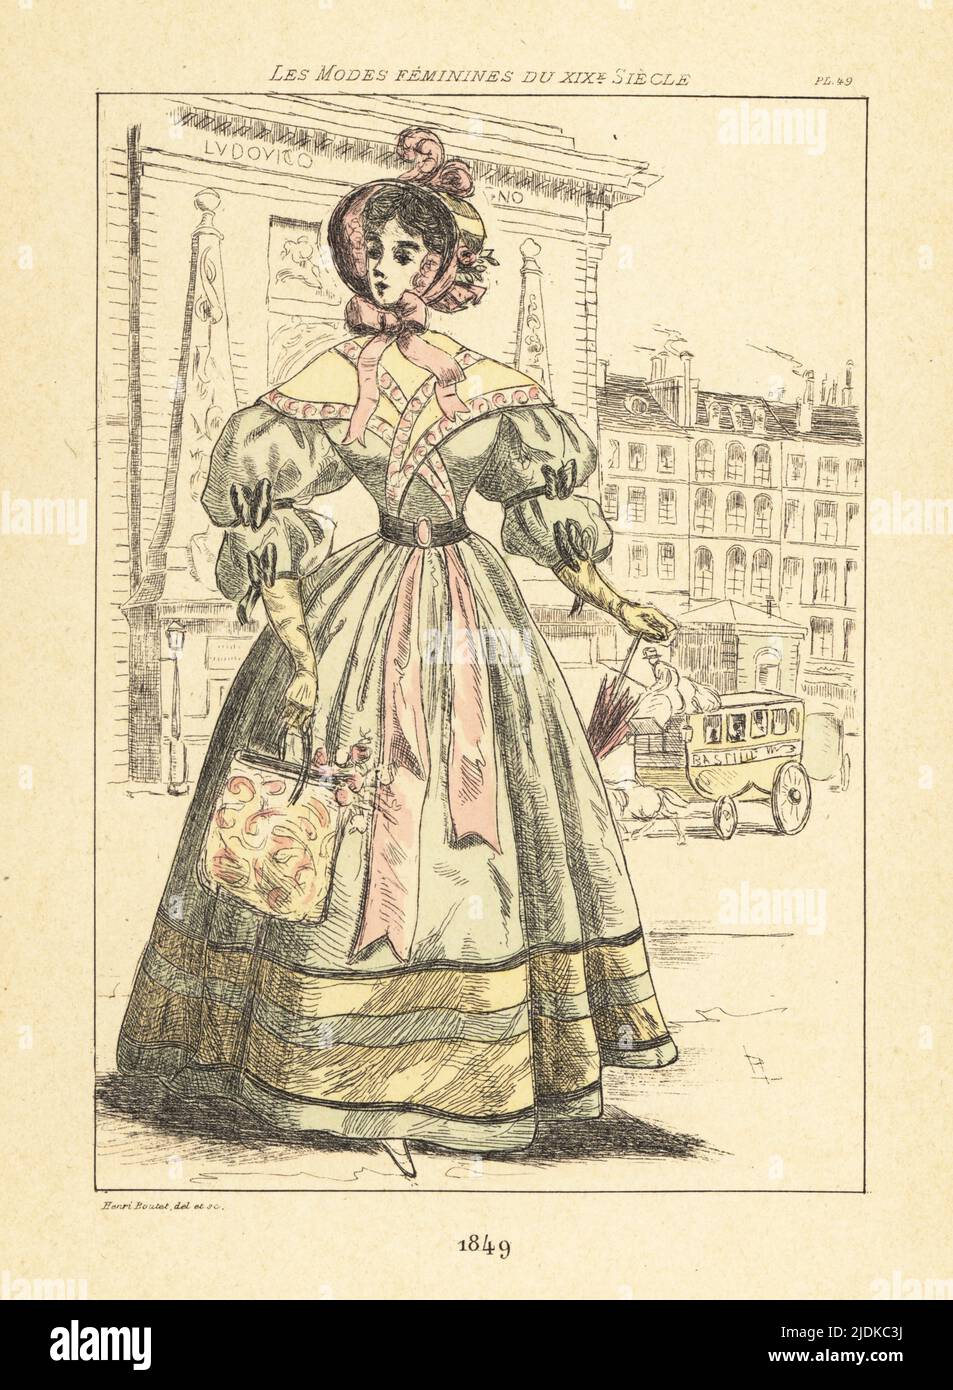 Fashionable lady with handbag and parasol in front of the monumental arch built at Port Saint-Denis, Paris, 1849. Inscribed Ludovico Magno, it was built by architect Francois Blondel for King Louis XIV in 1672. A horse-drawn coach for Bastille behind. Handcoloured drypoint or pointe-seche etching by Henri Boutet from Les Modes Feminines du XIXeme Siecle (Feminine Fashions of the 19th Century), Ernest Flammarion, Paris, 1902. Boutet (1851-1919) was a French artist, engraver, lithographer and designer. Stock Photo